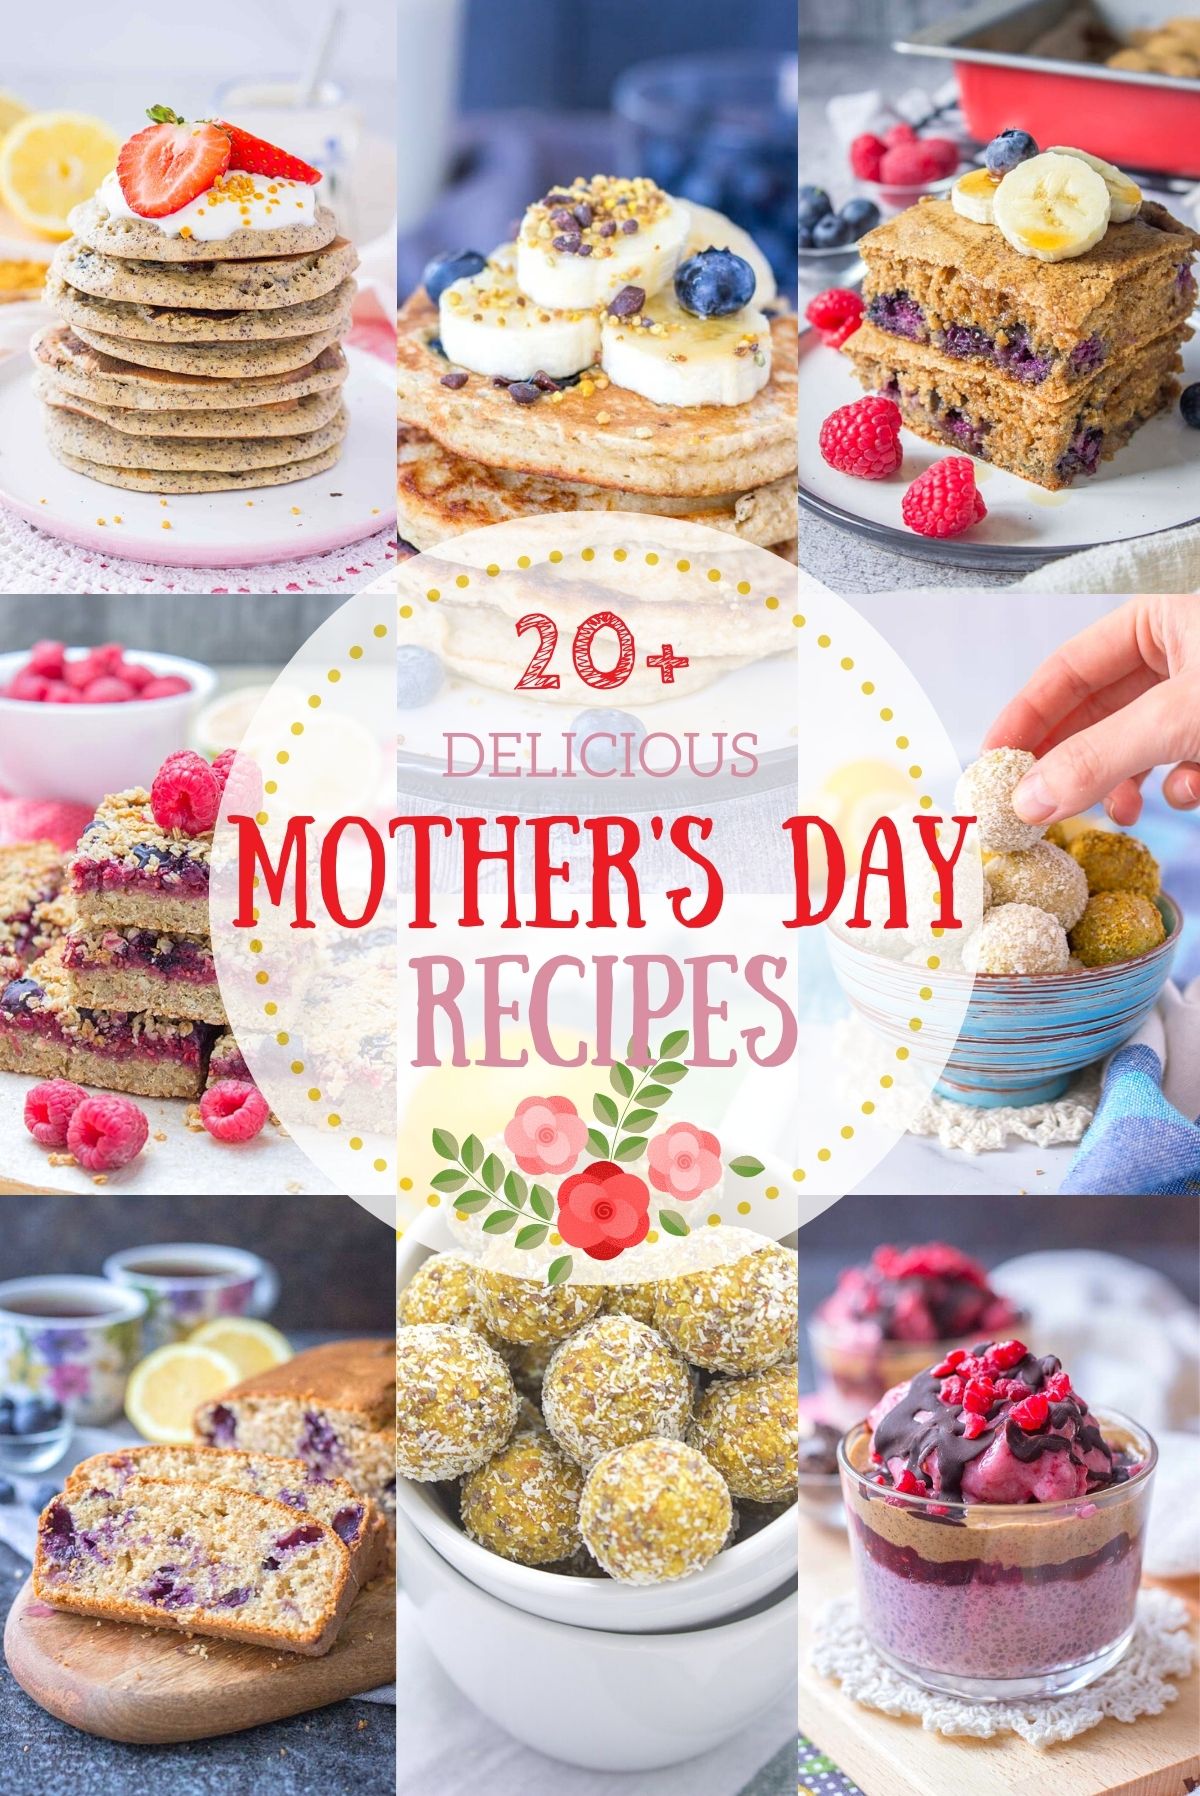 20+ Healthy Mother’s Day Recipes